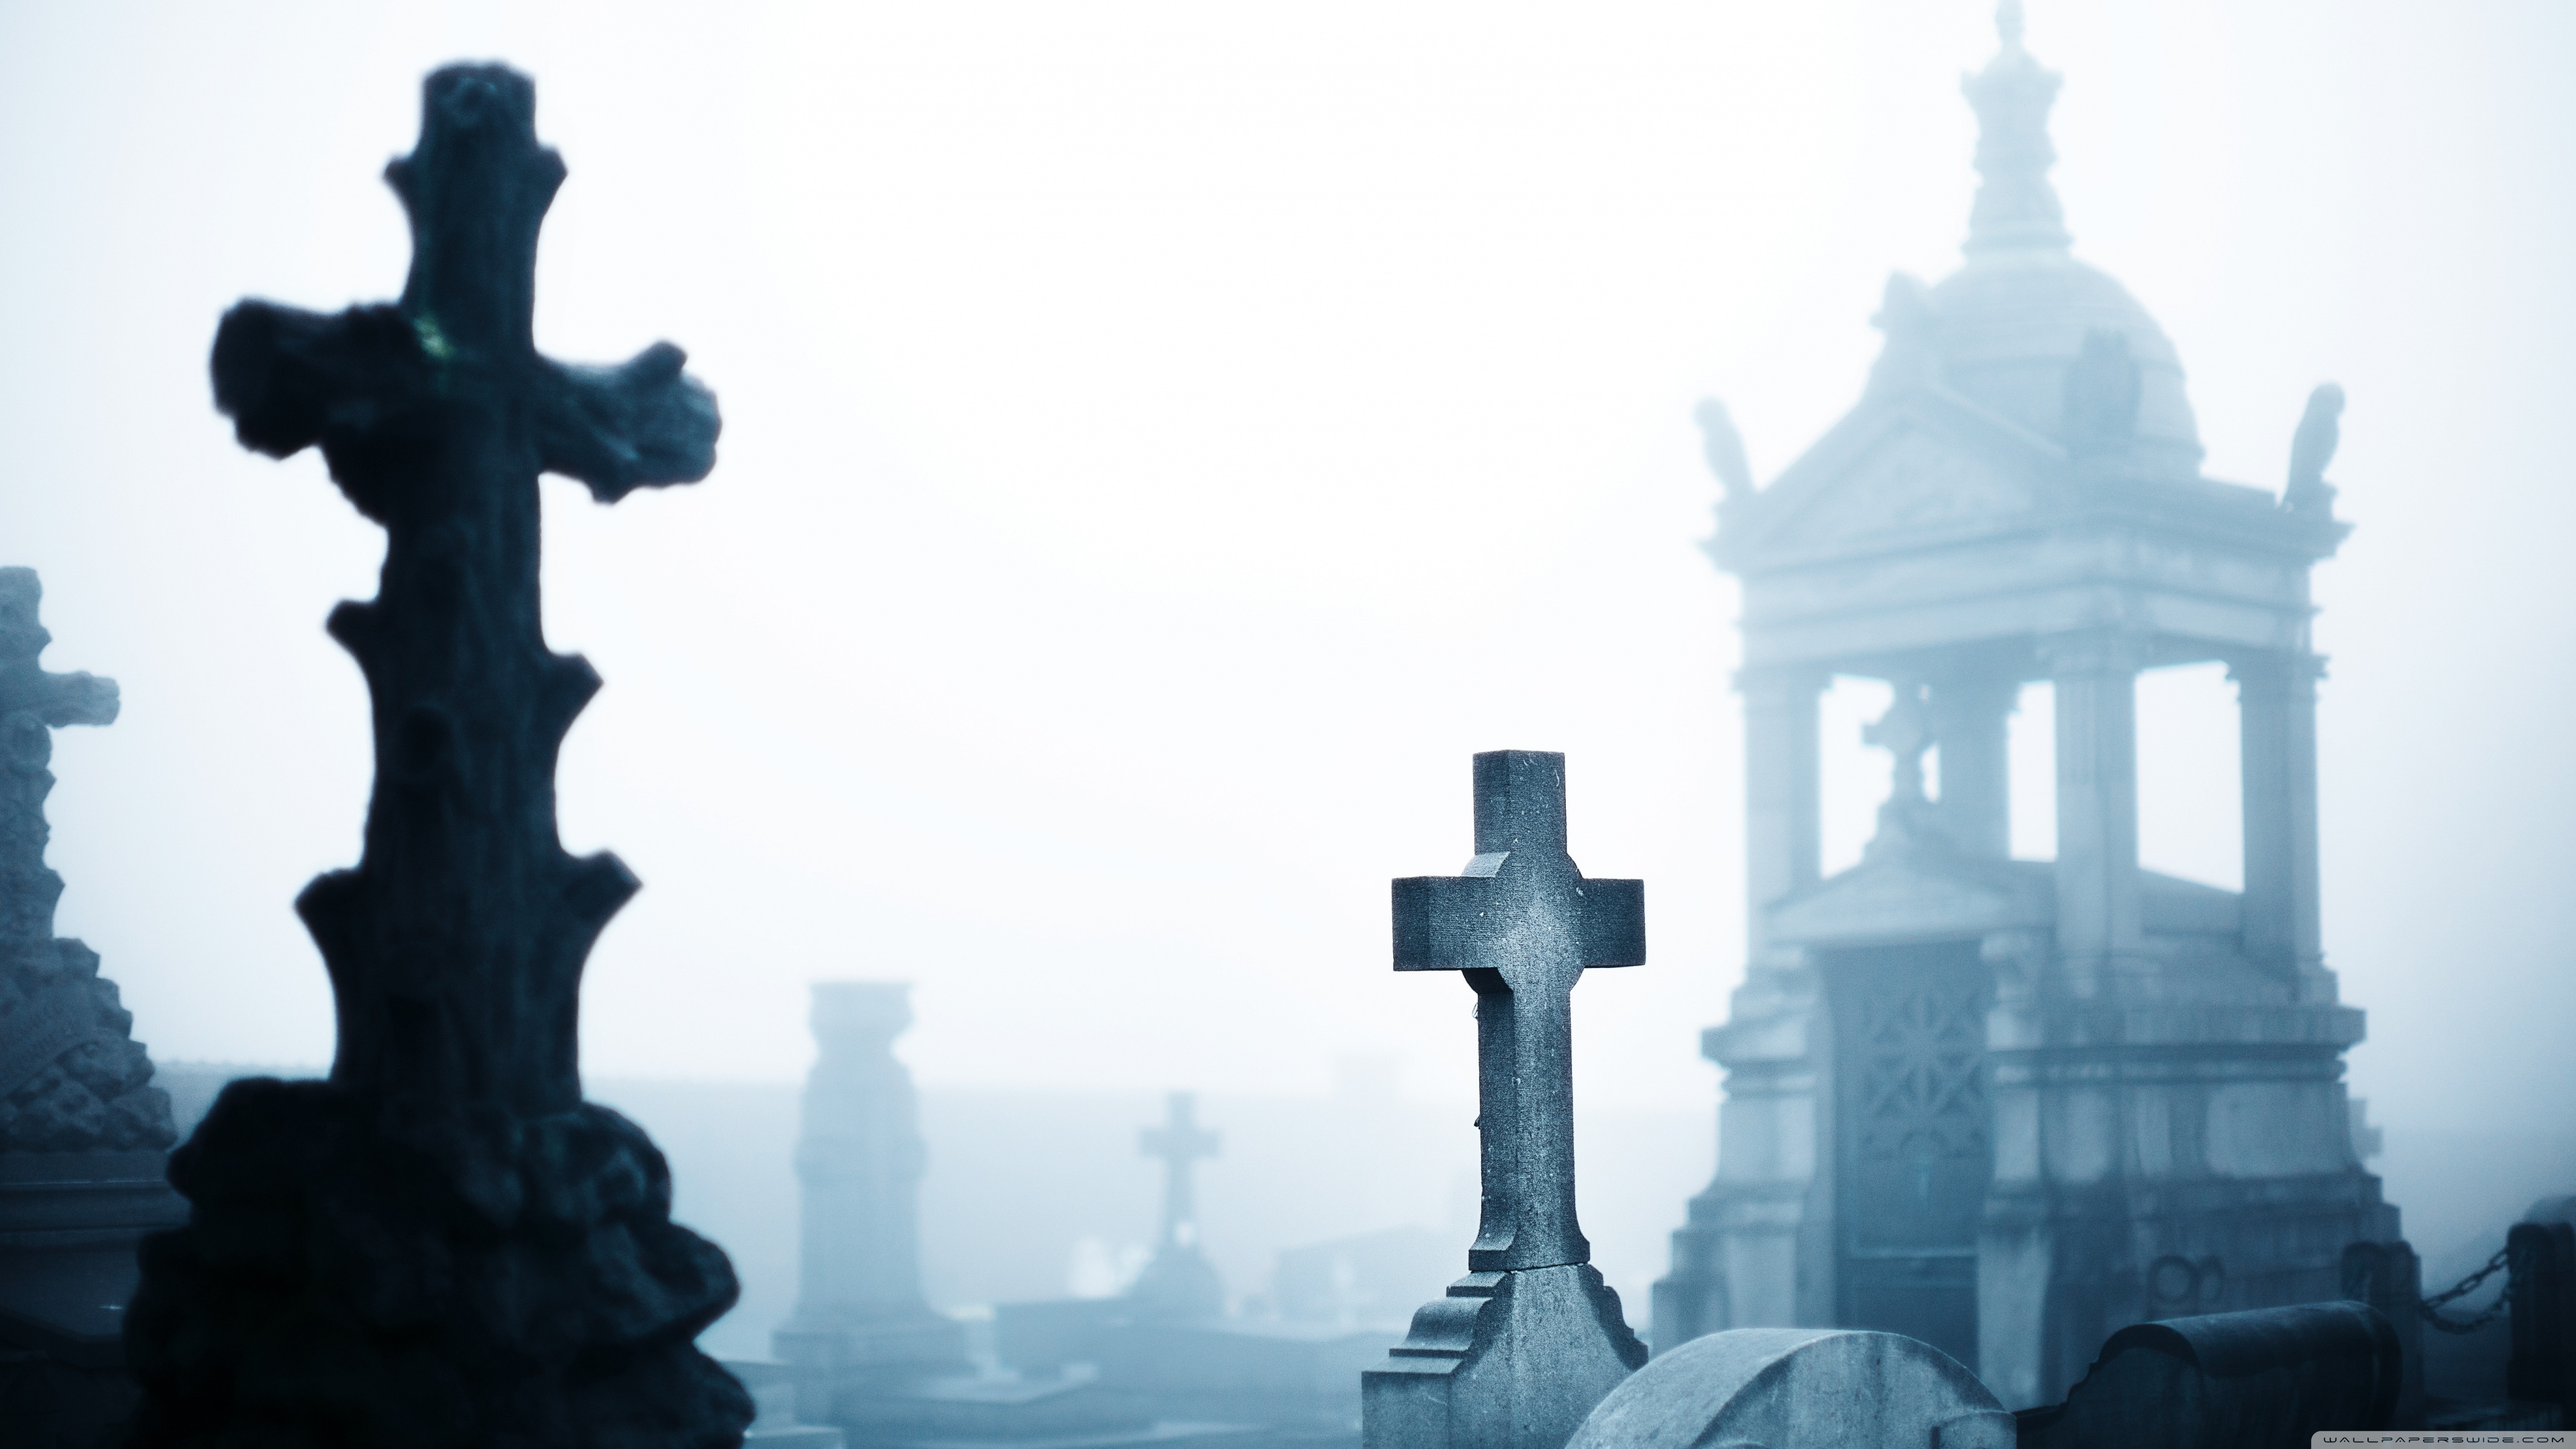 Cemetery Backgrounds